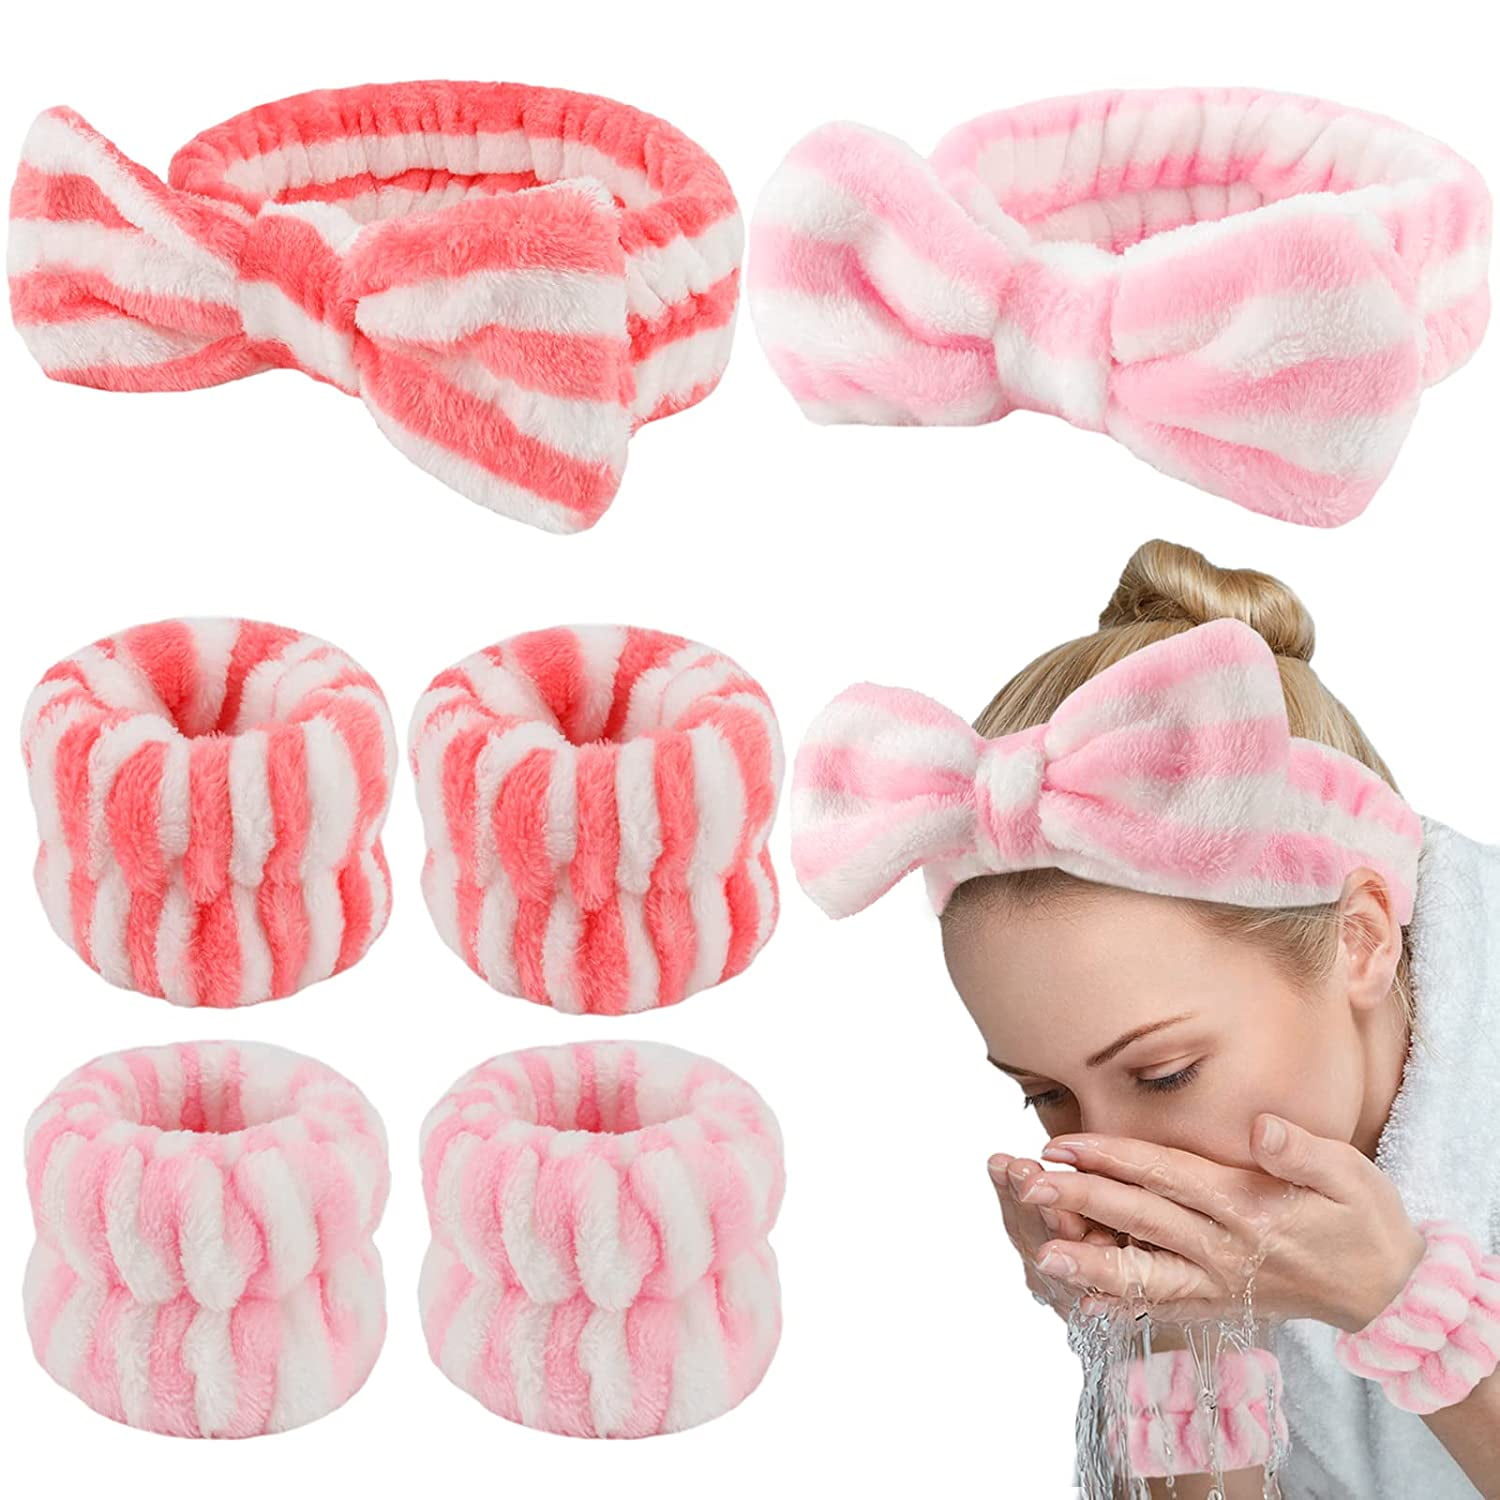 Xtinmee 48 Pcs Spa Headband Bulk Pink Party Supplies Wristband Eye Mask for  Girls Women Birthday Sleepover Party Favors(Pink)